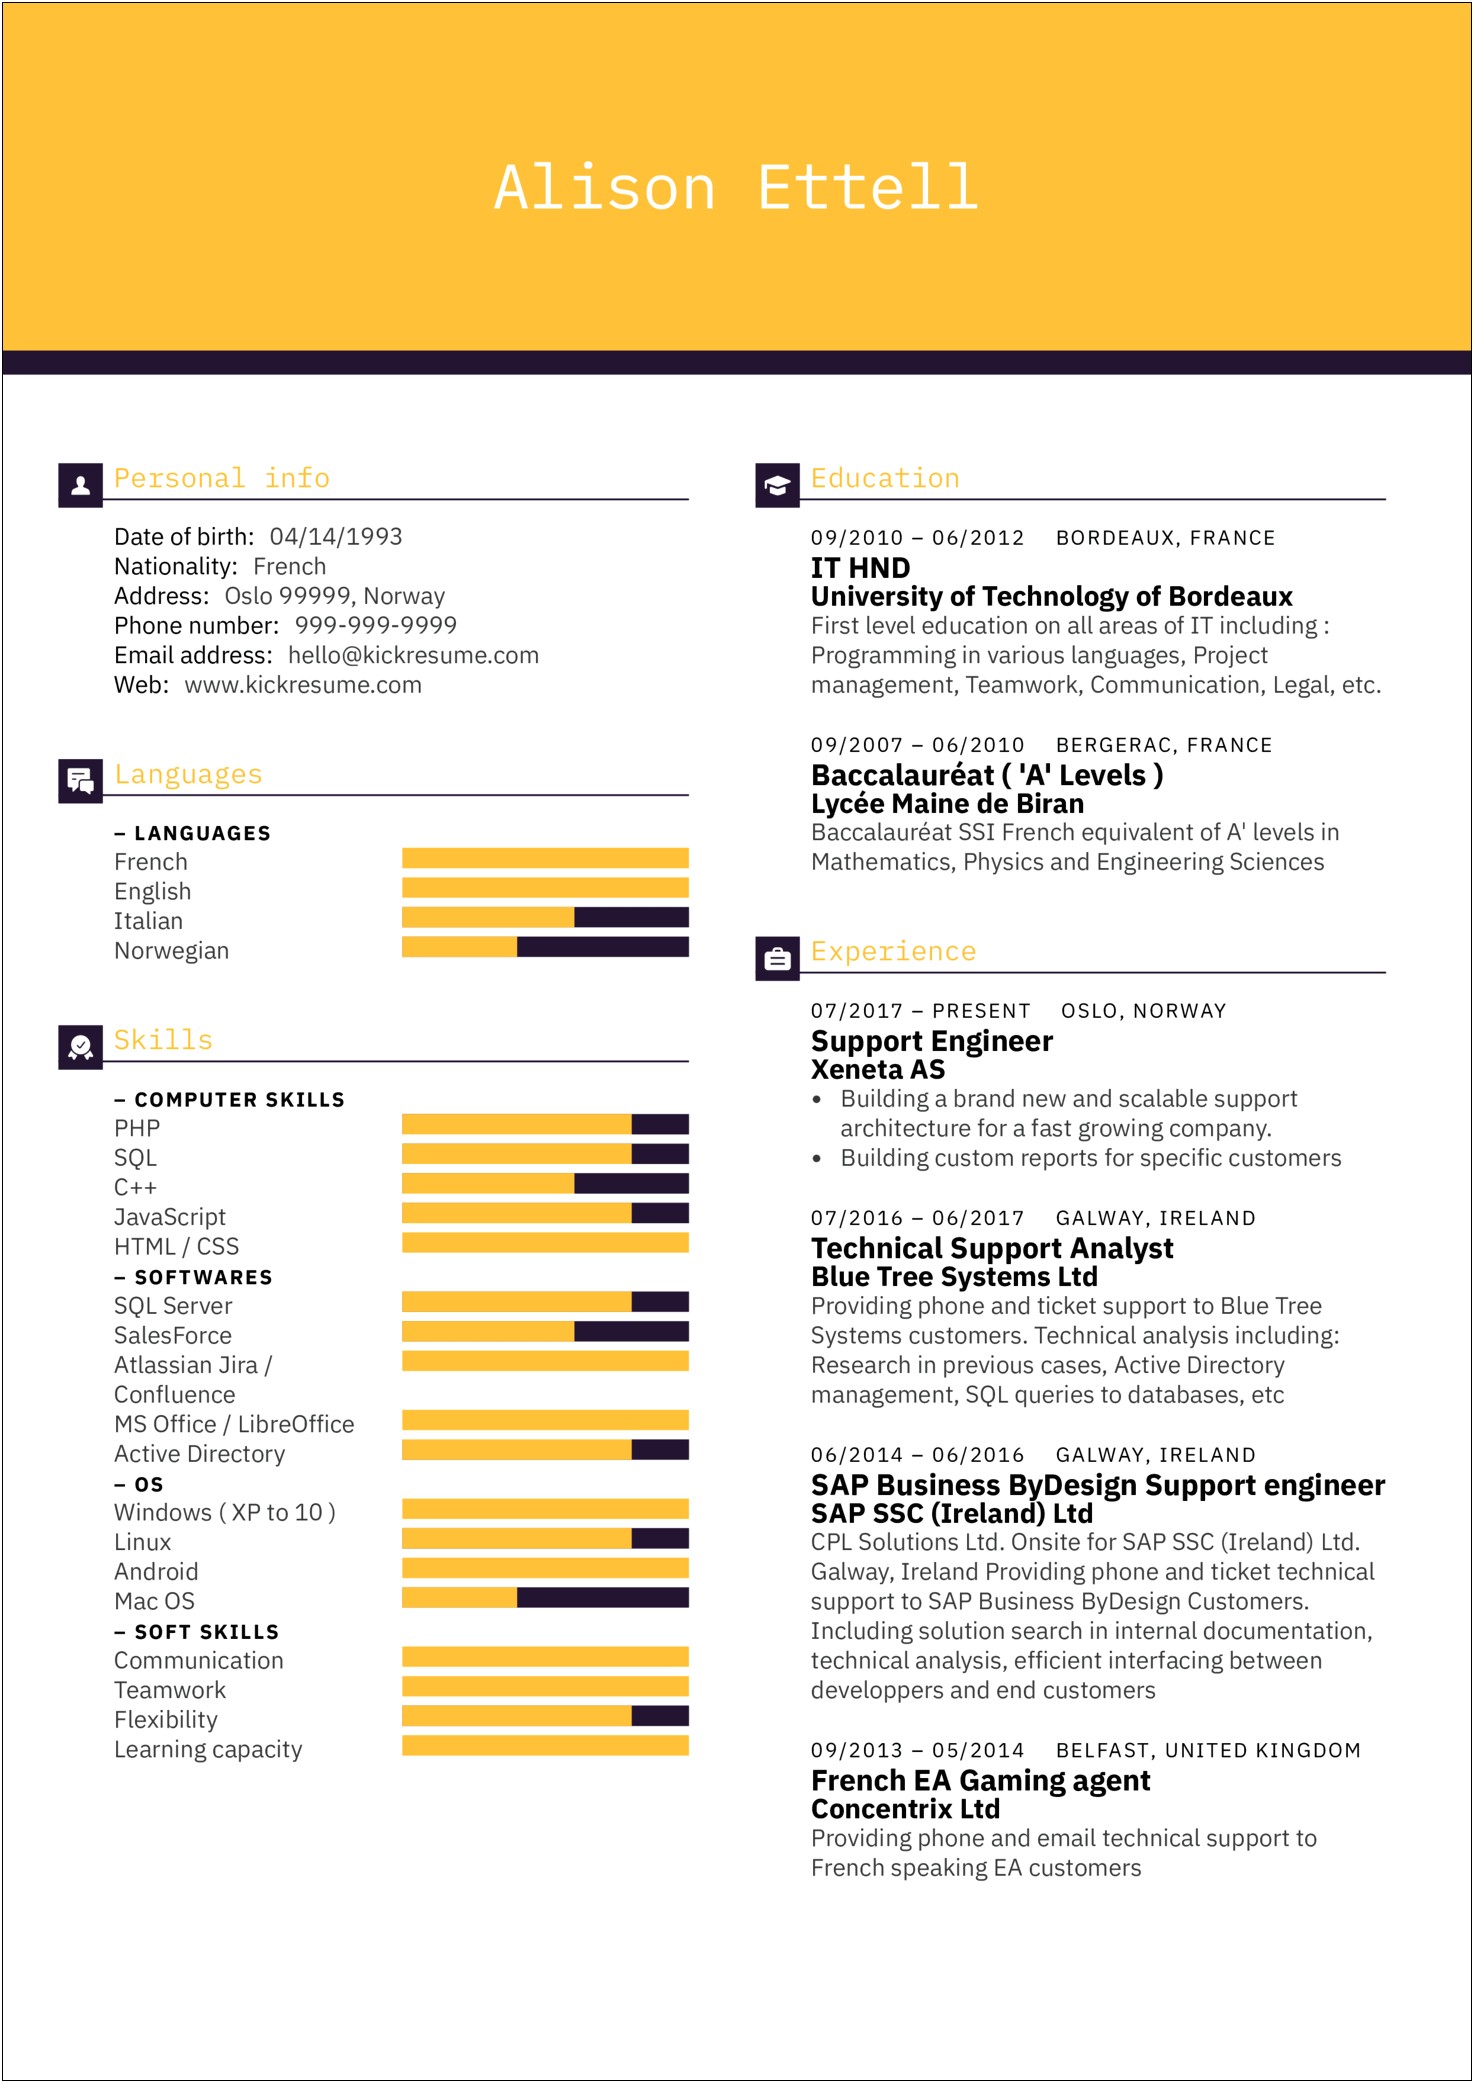 Resume Template For Database Support Engineer